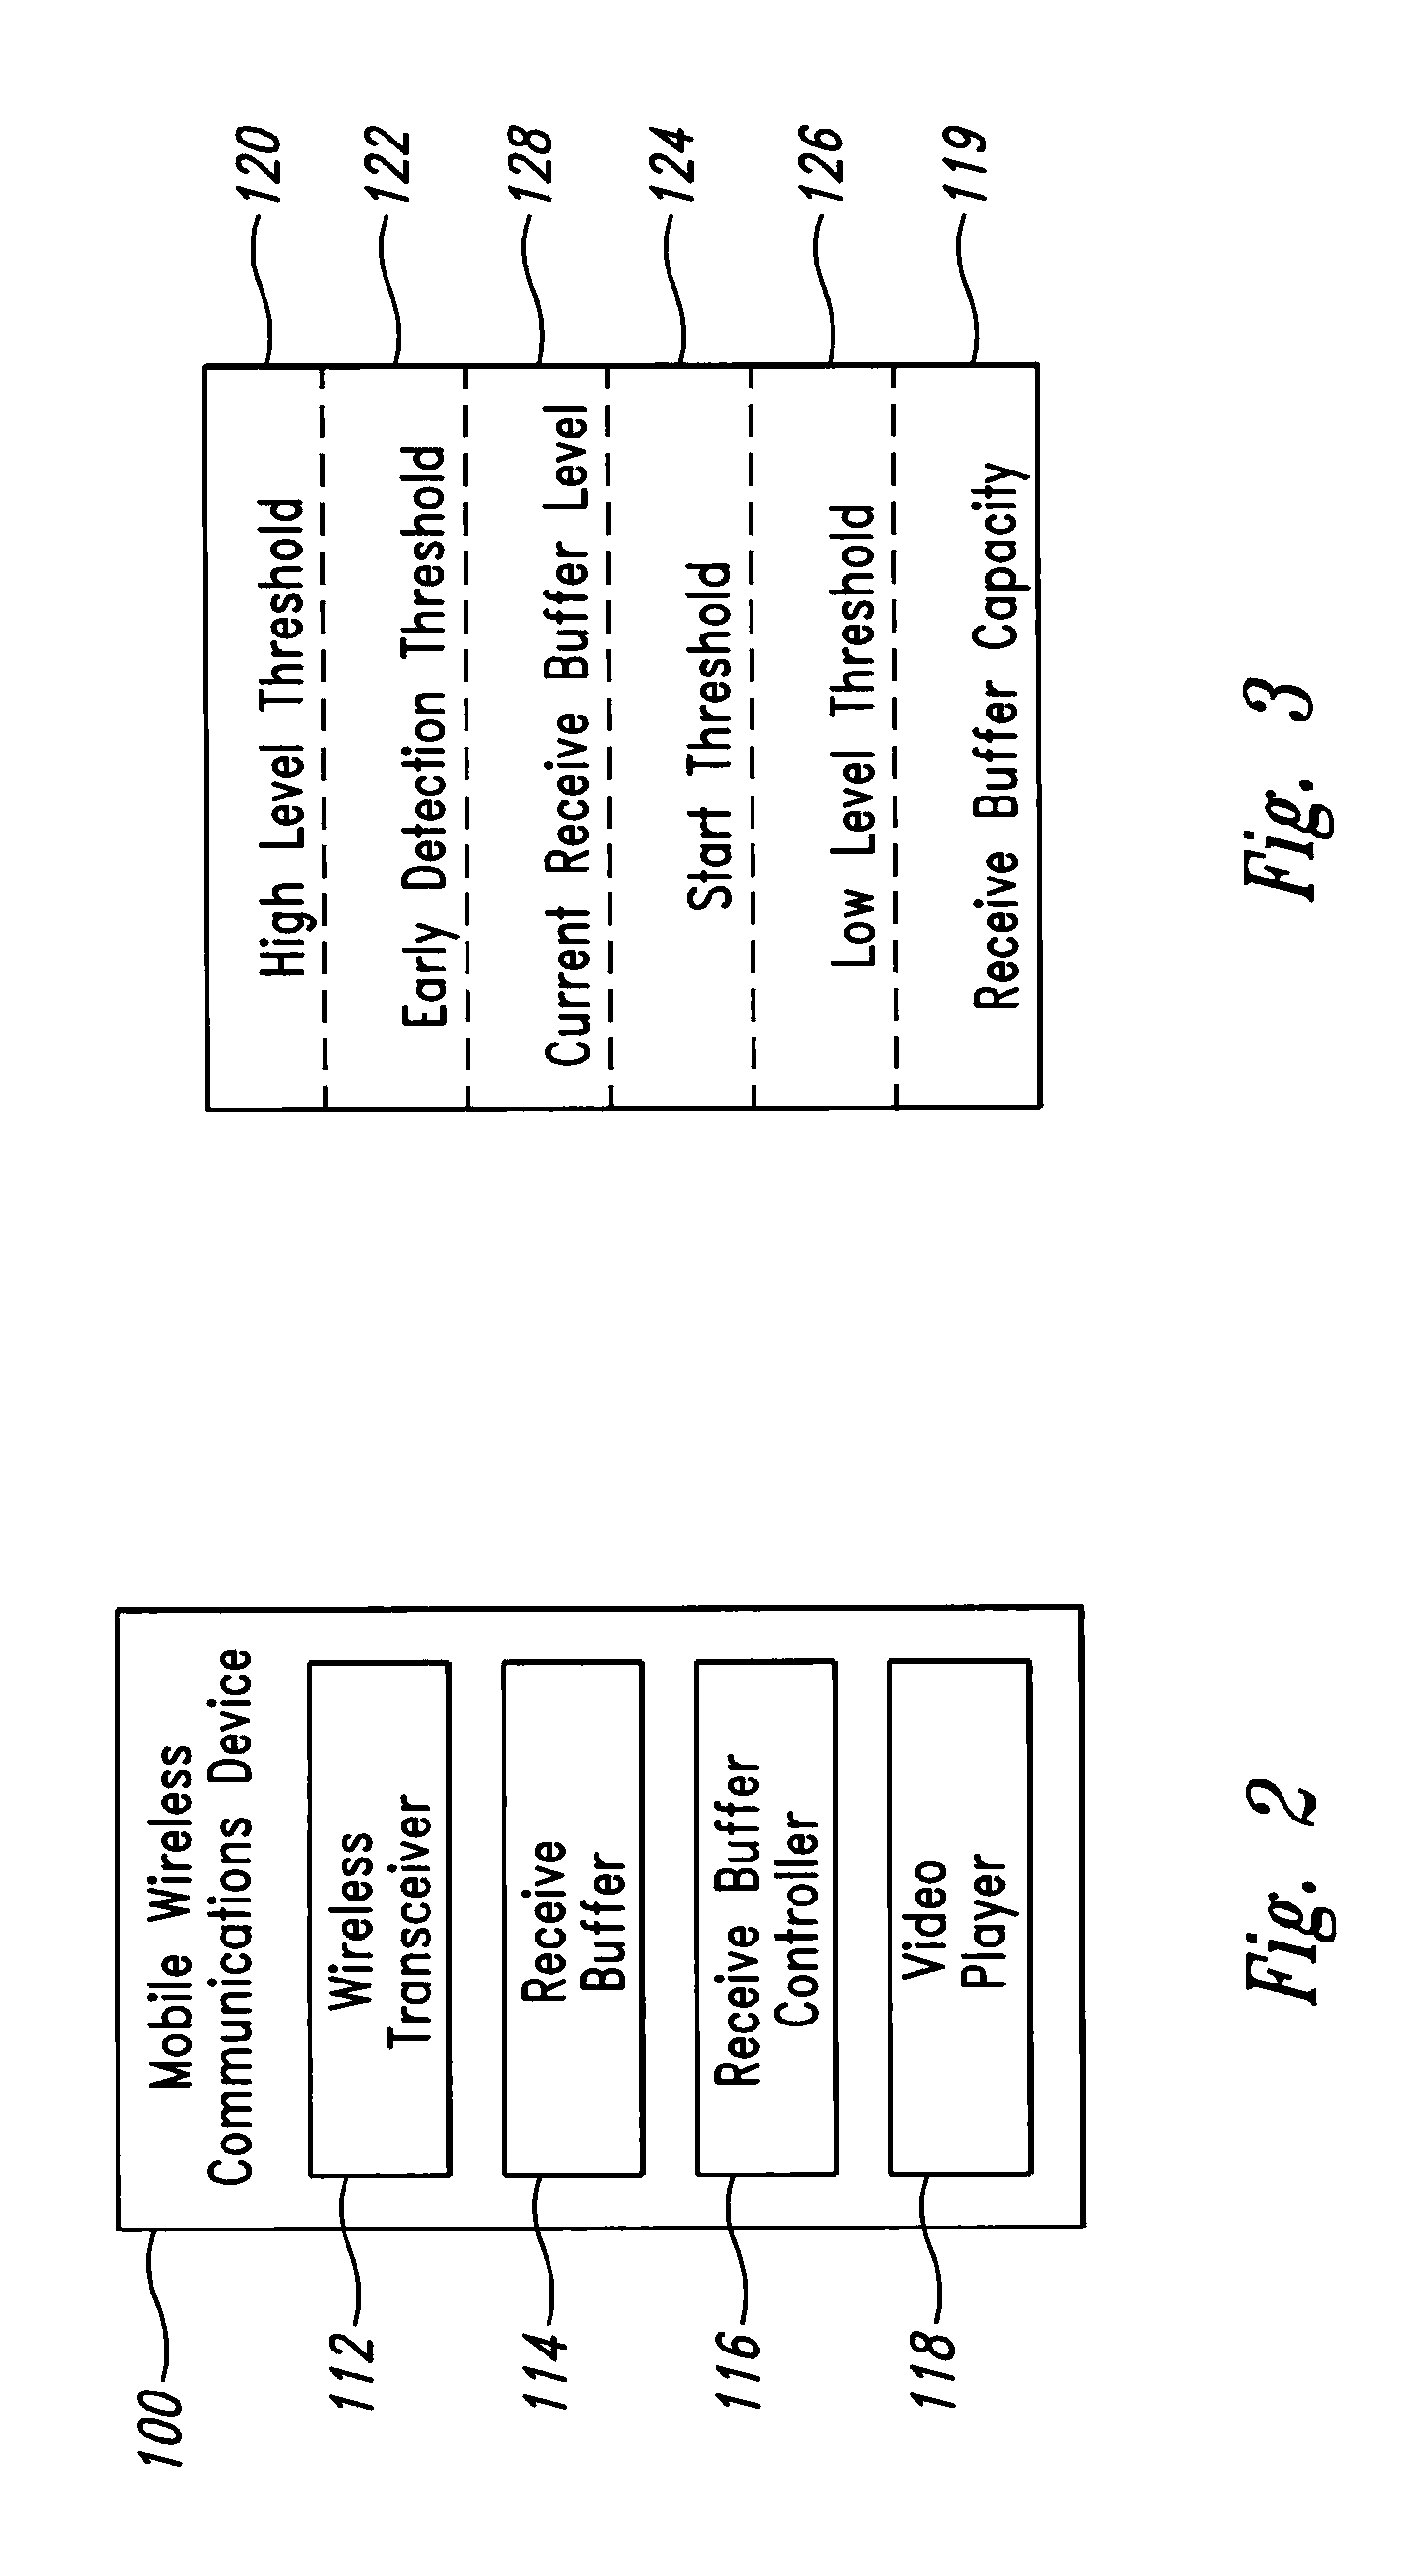 Video service buffer management in a mobile rate control enabled network